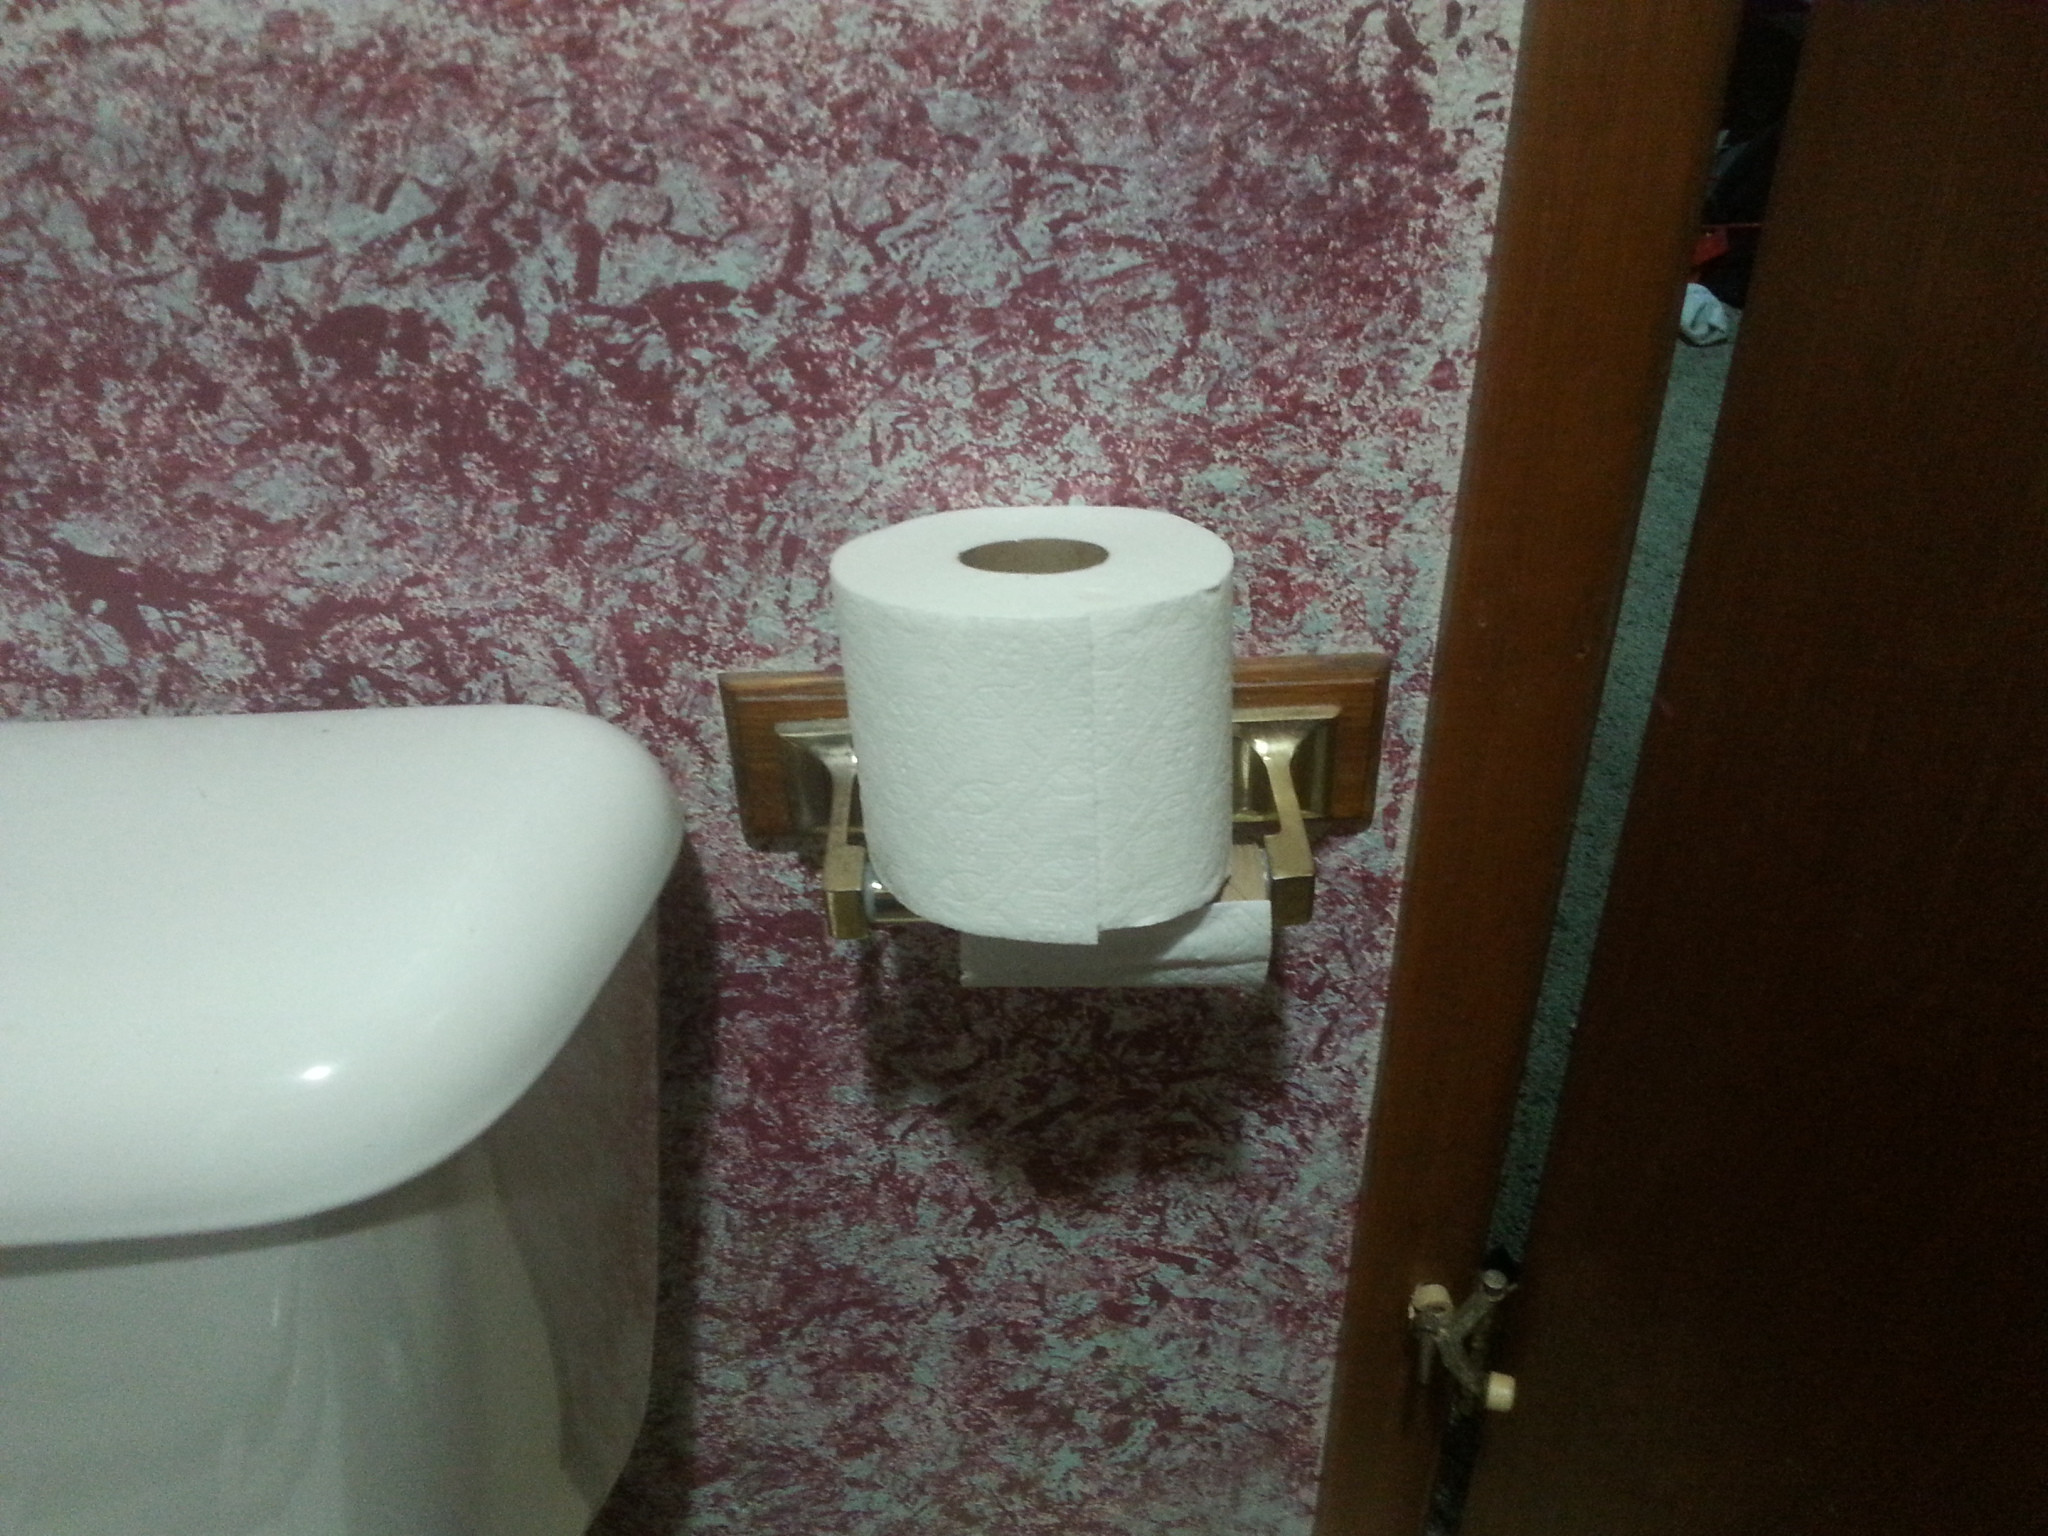 toilet paper roll put on top of the holder